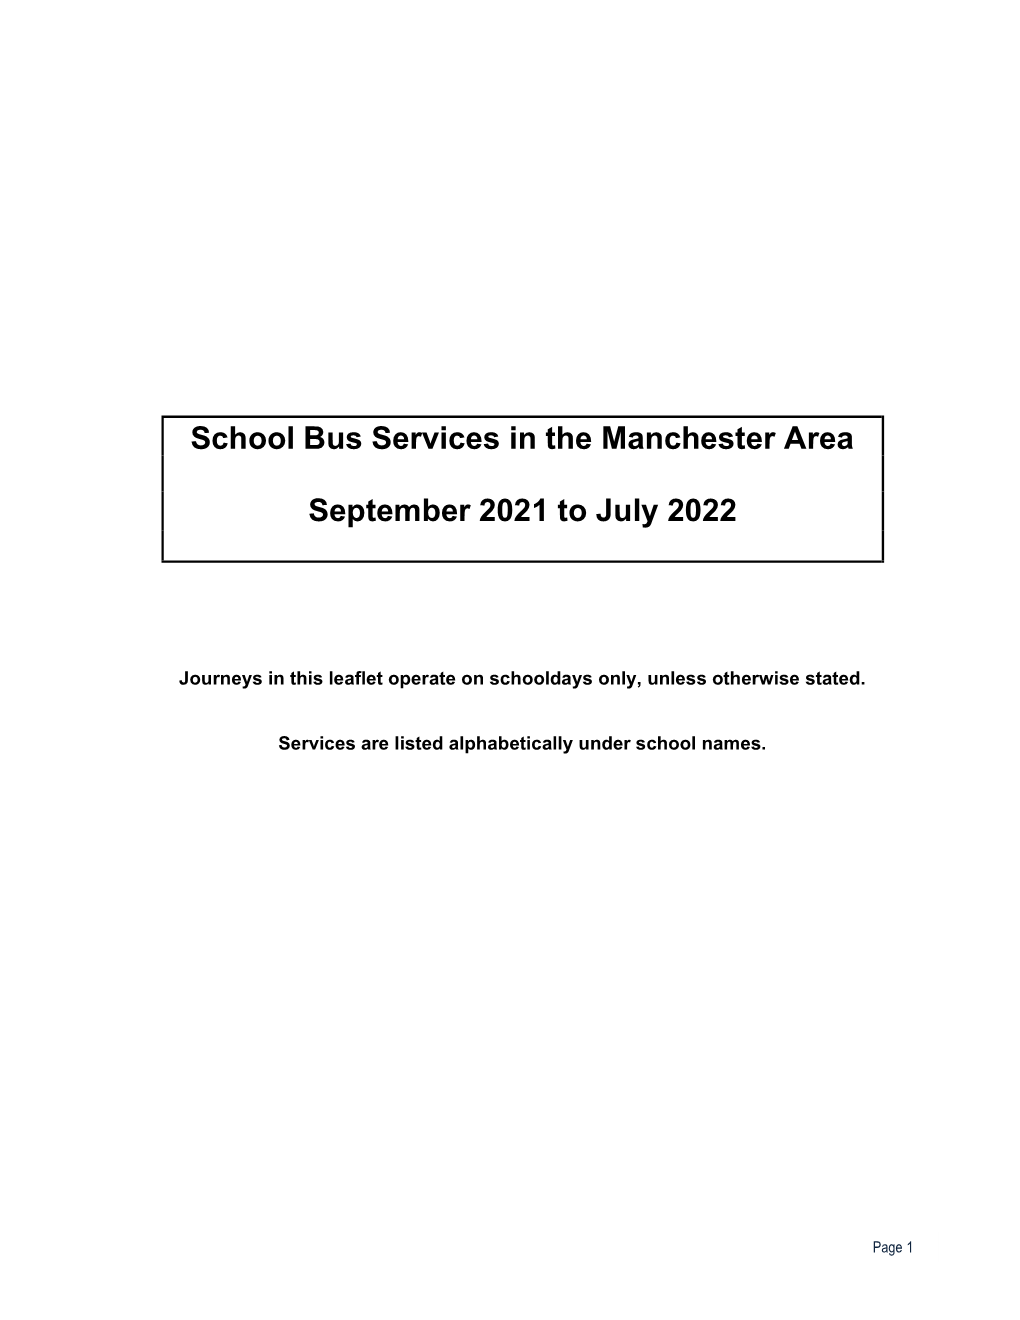 School Bus Services in the Manchester Area September 2021